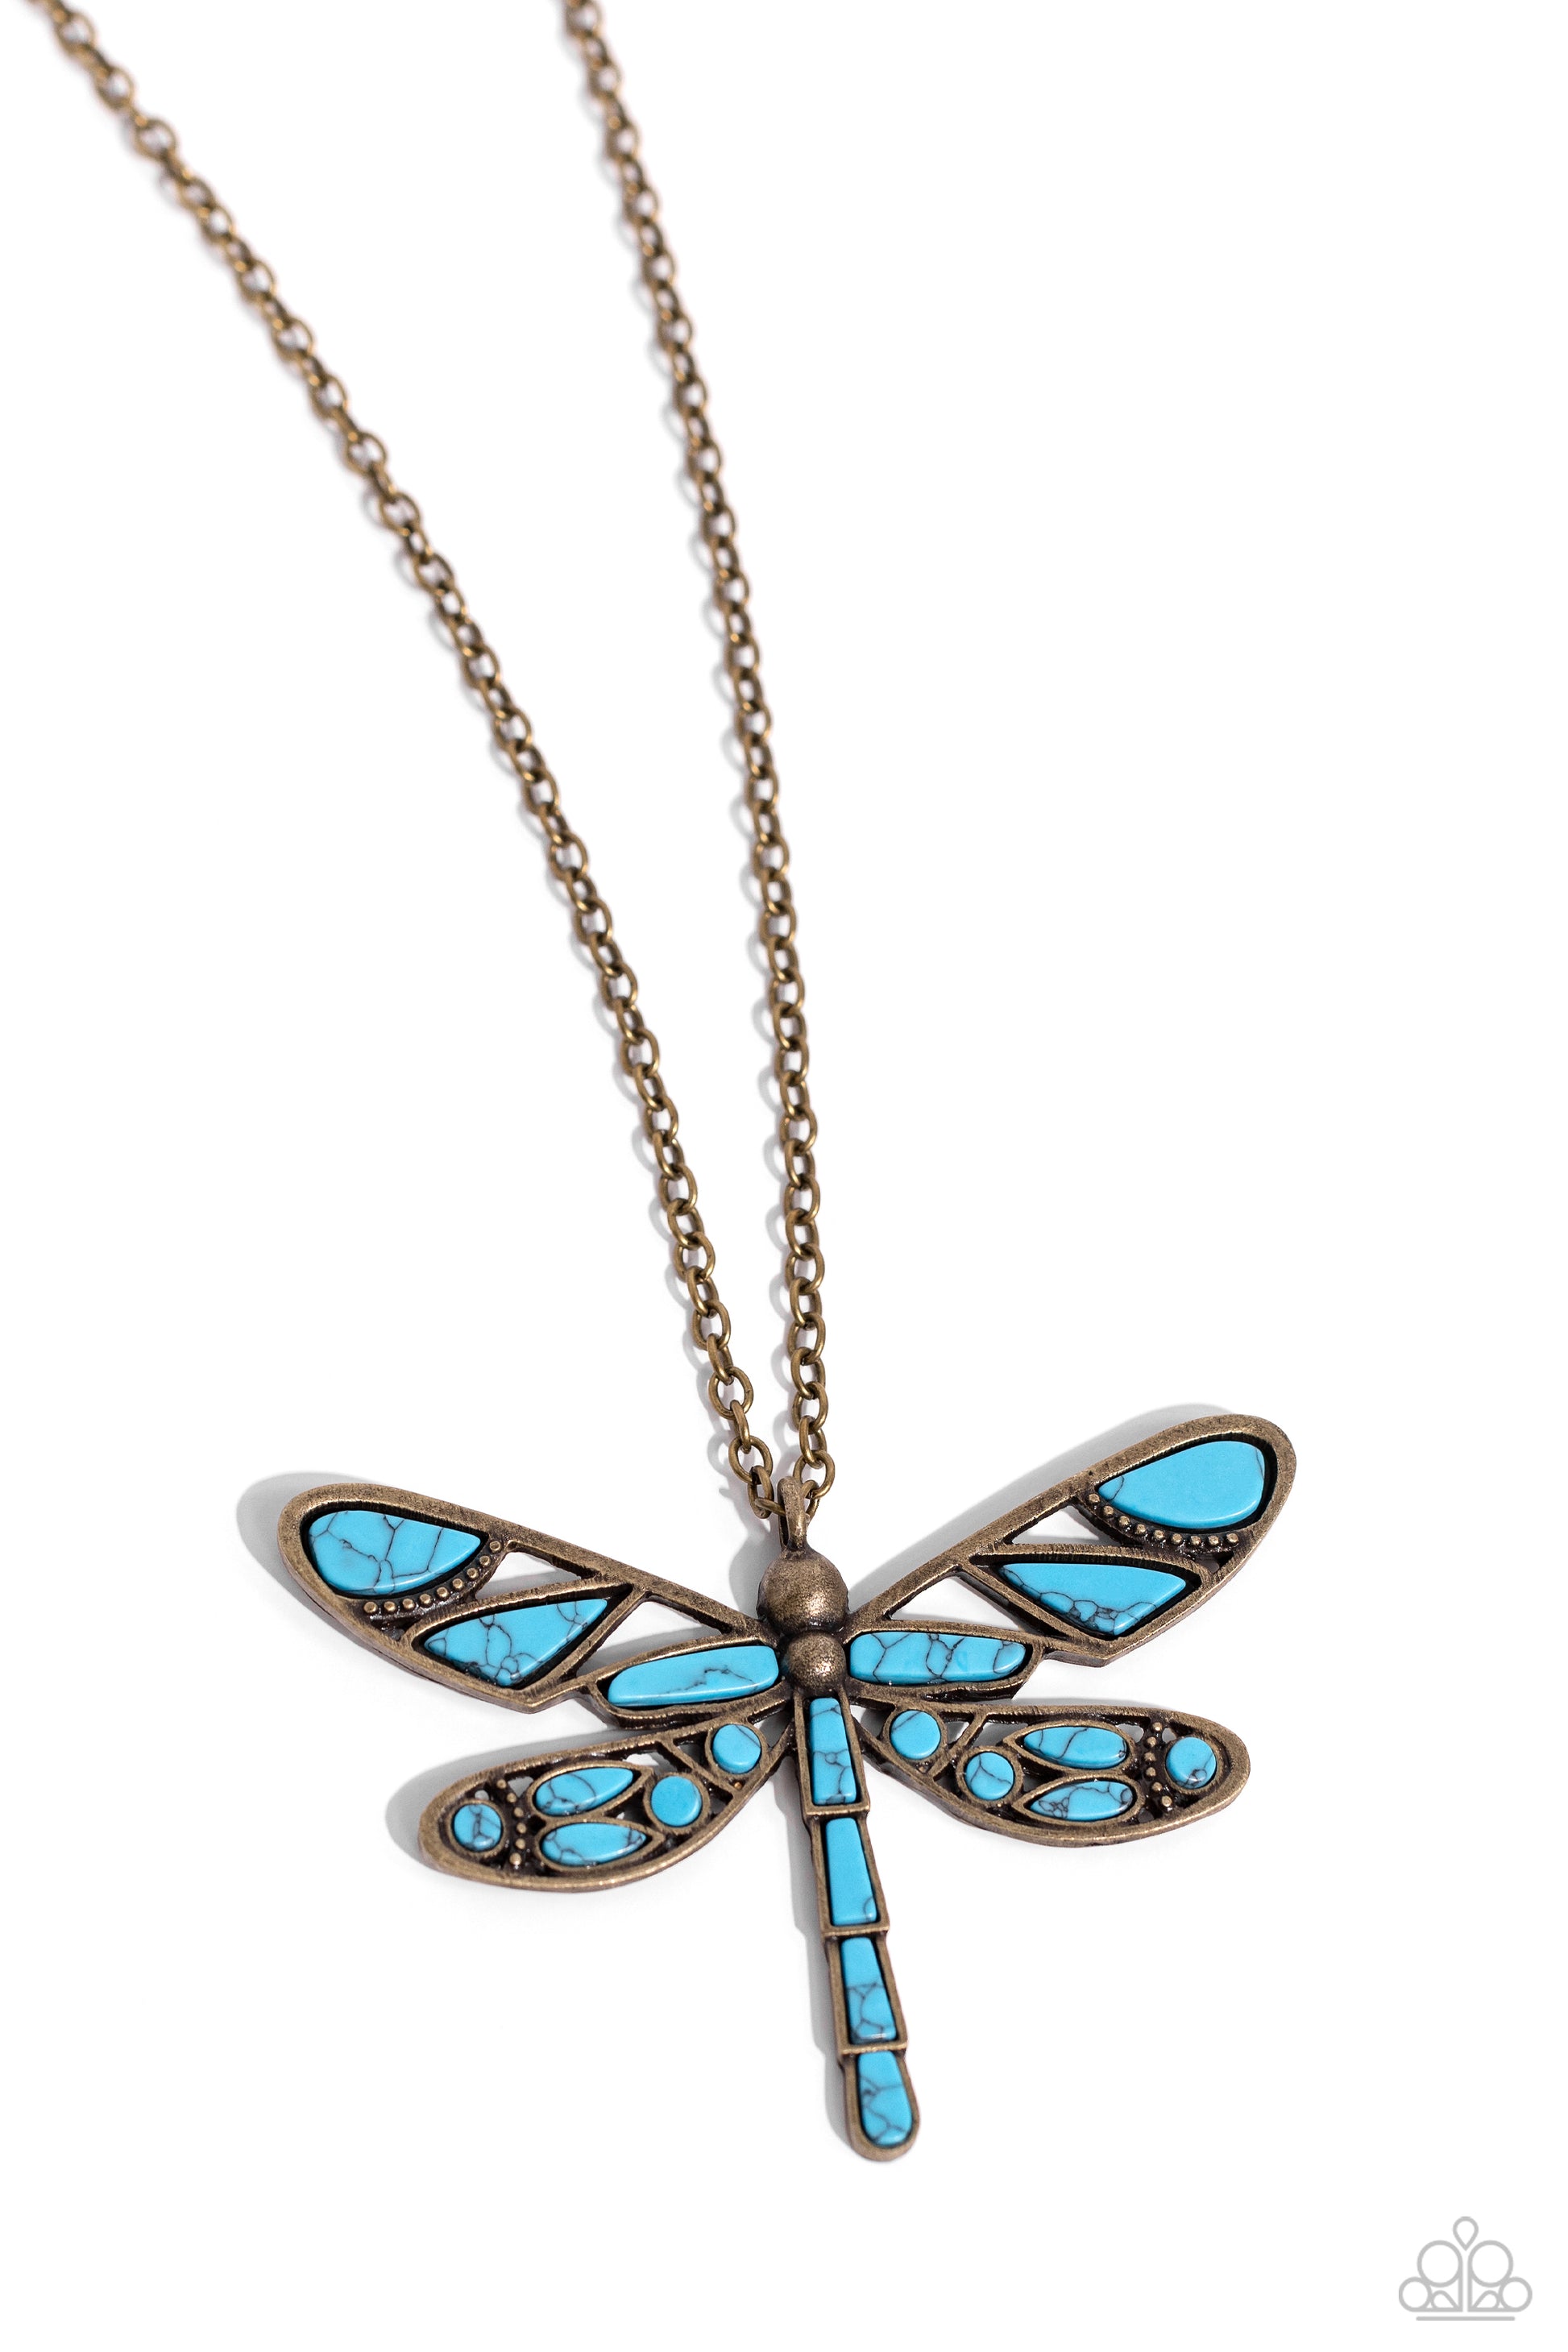 FLYING Low Brass Dragonfly Necklace - Paparazzi Accessories  Featuring a classic brass chain, various cuts of turquoise stone are passed into an oversized, airy brass dragonfly pendant for a rustically earthy centerpiece. Features an adjustable clasp closure. As the stone elements in this piece are natural, some color variation is normal.  Sold as one individual necklace. Includes one pair of matching earrings.  P2SE-BRXX-154XX